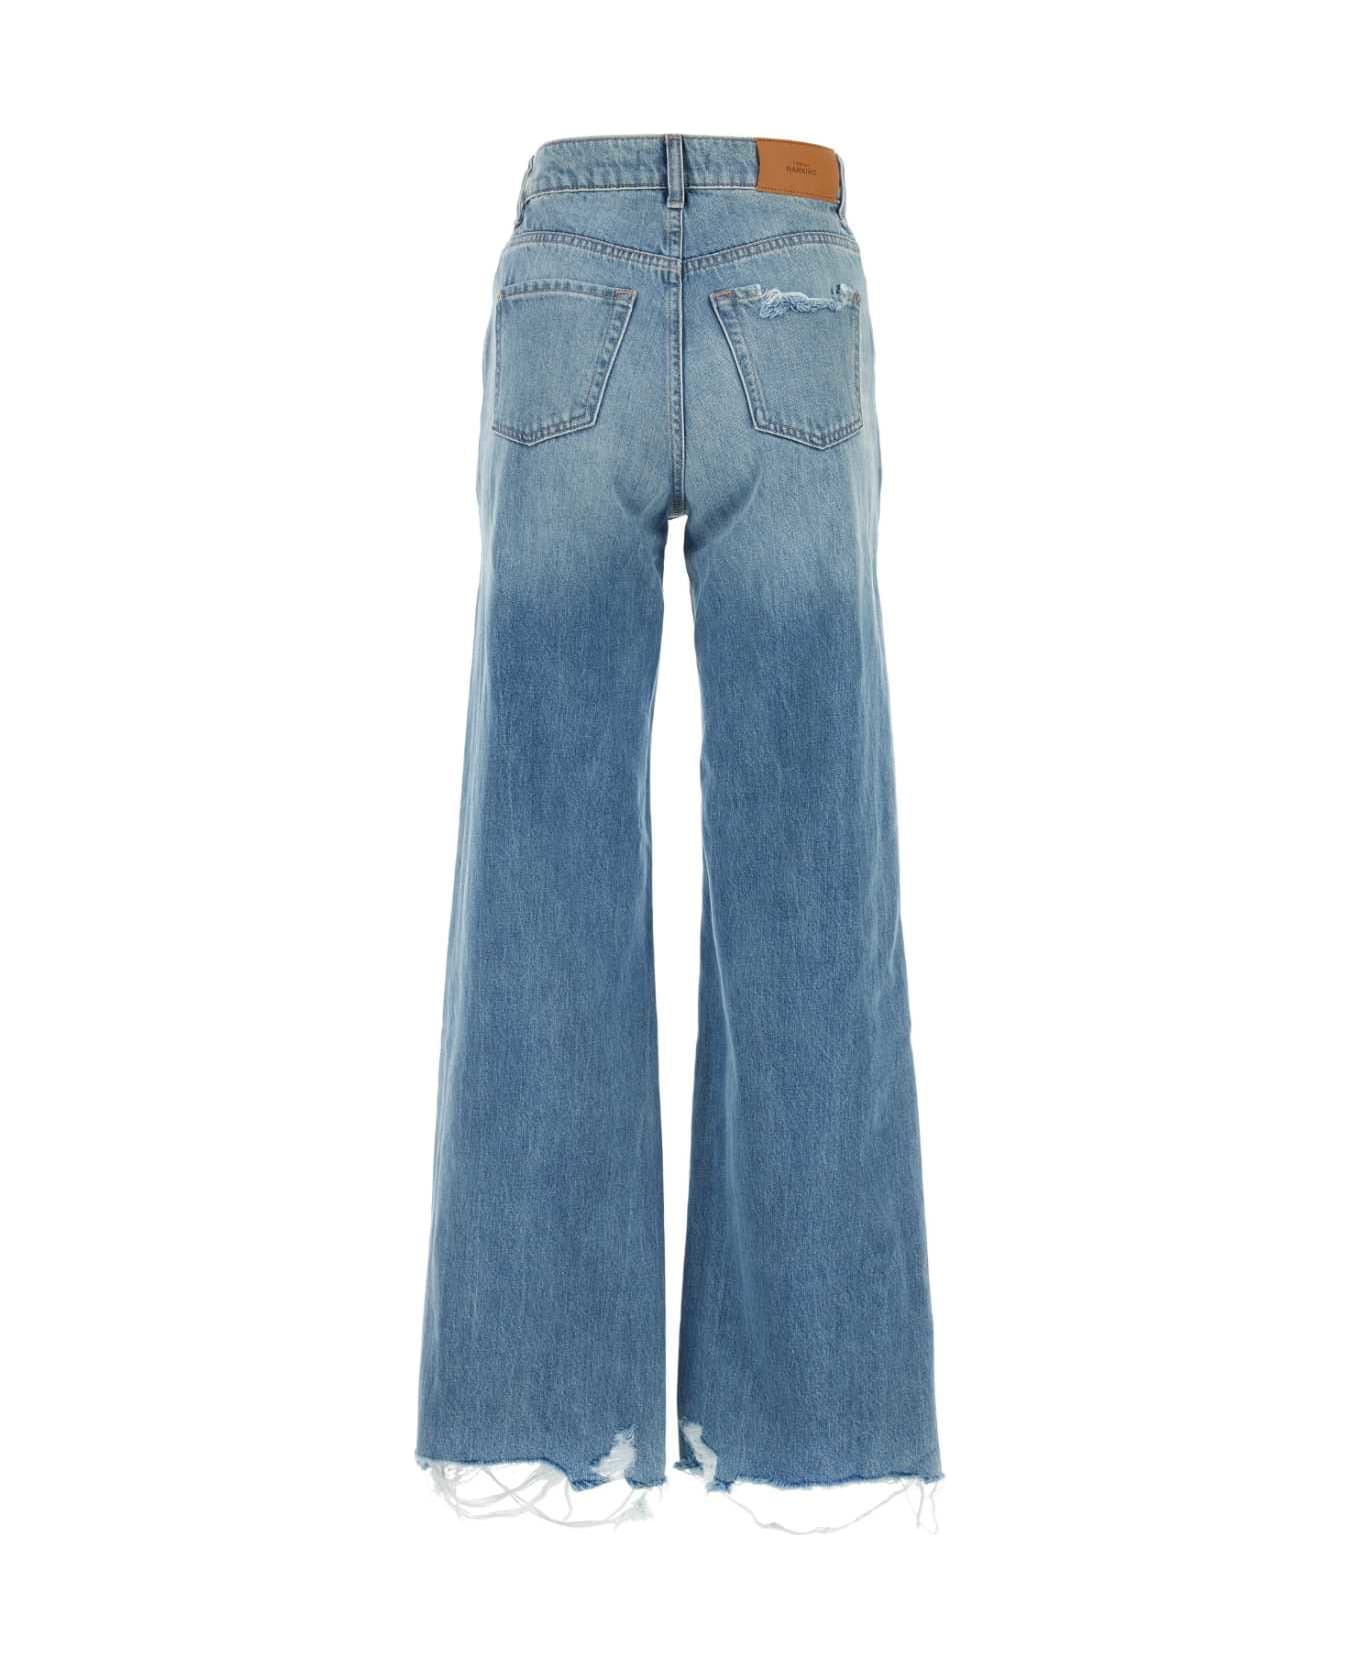 7 For All Mankind Denim Scout Wide-leg Jeans - MIDBLUE デニム